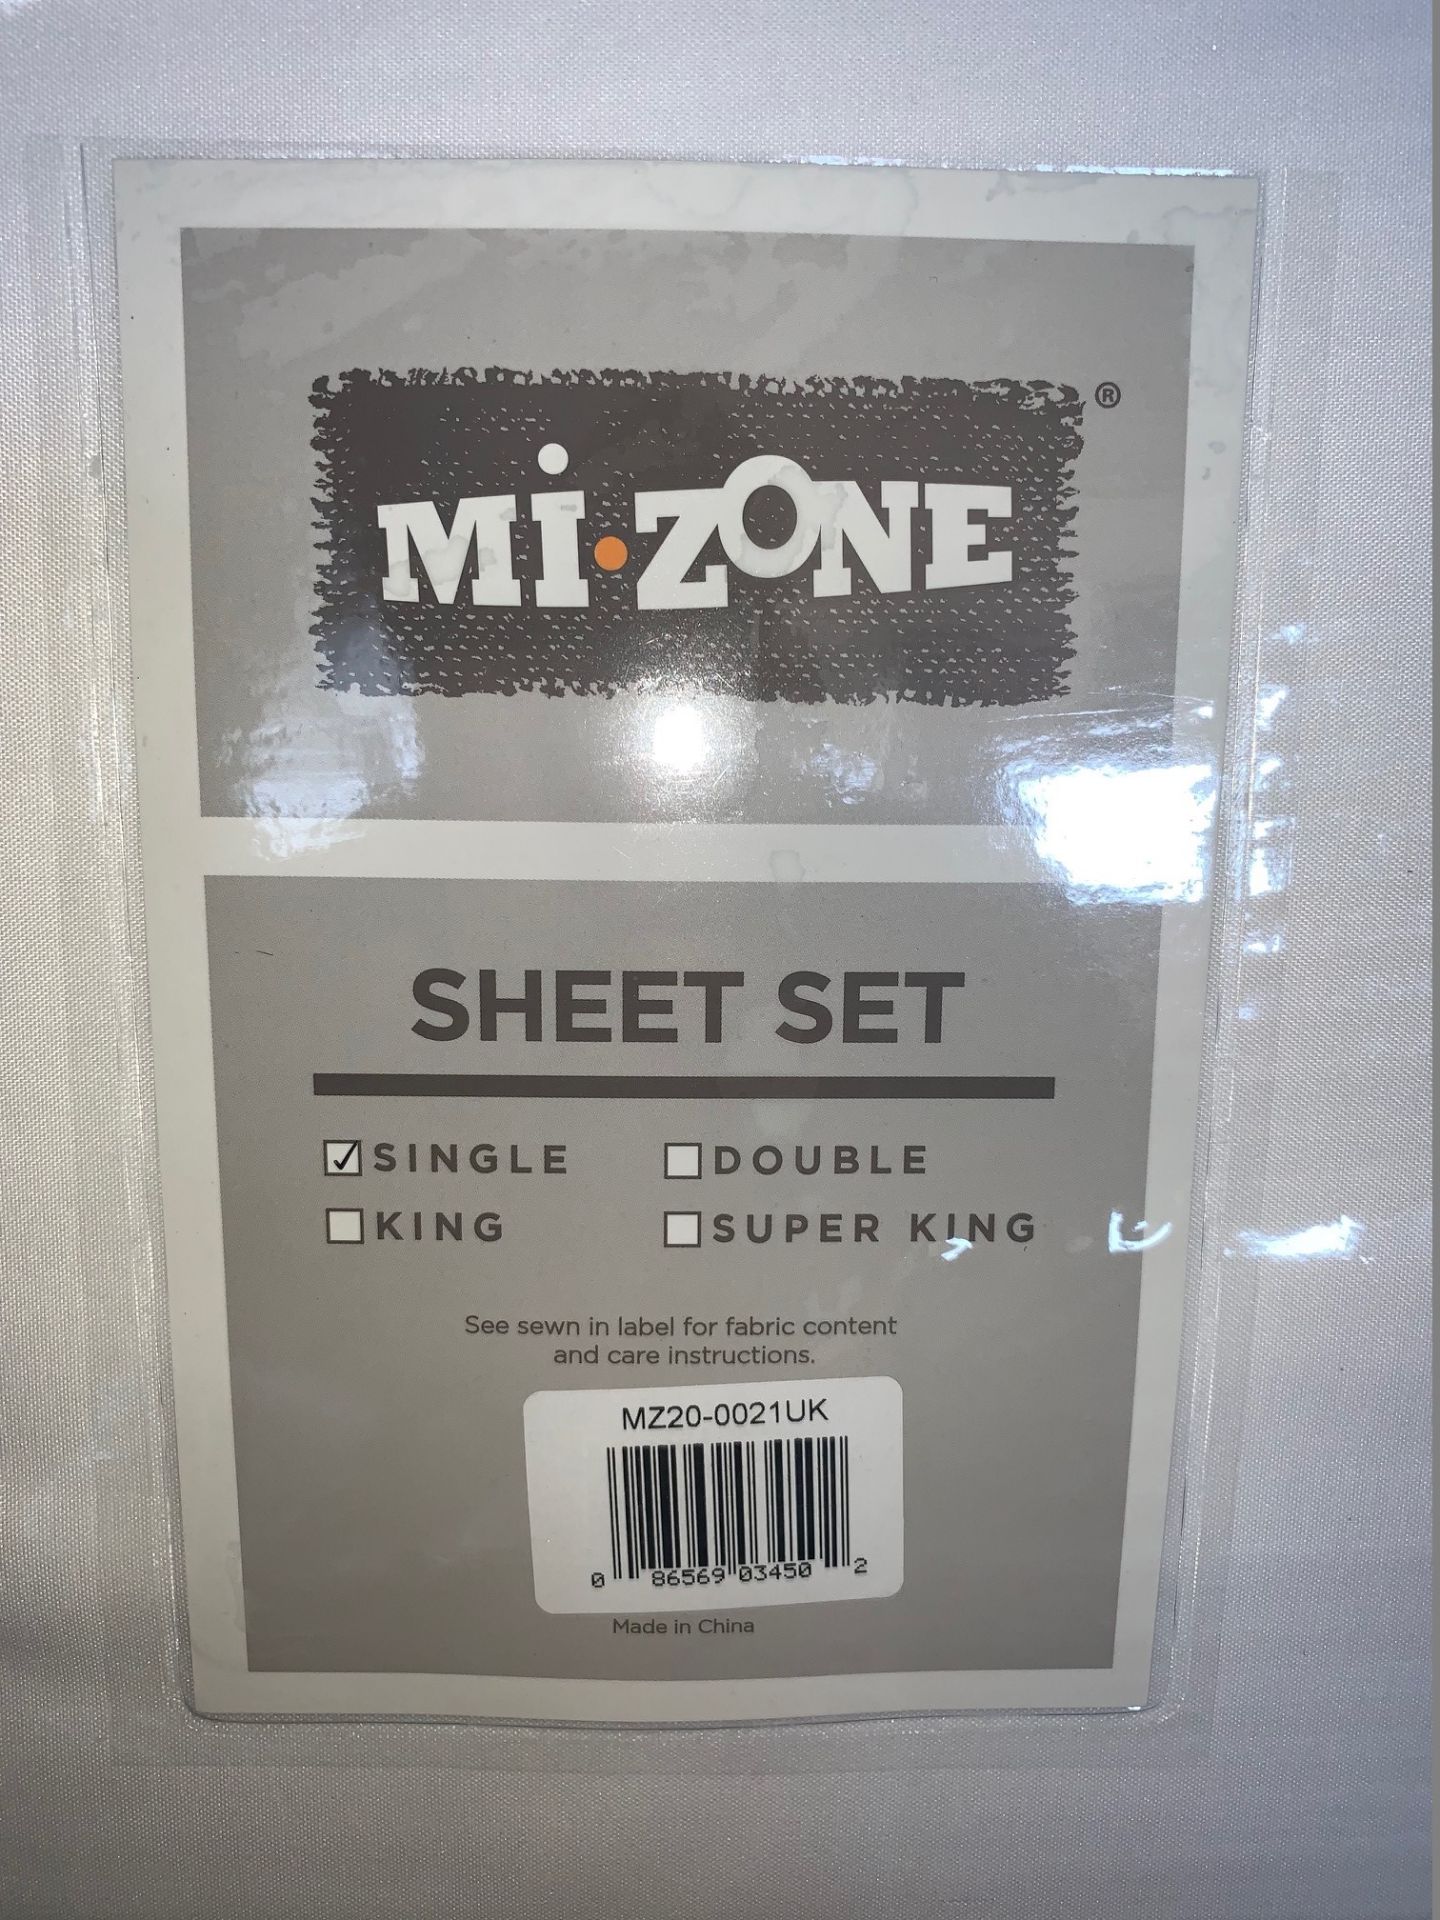 3 x Mi-Zone Single Sheet Sets White - Includes Fitted Sheet, Flat Sheet and Pillowcases - Product - Image 2 of 2